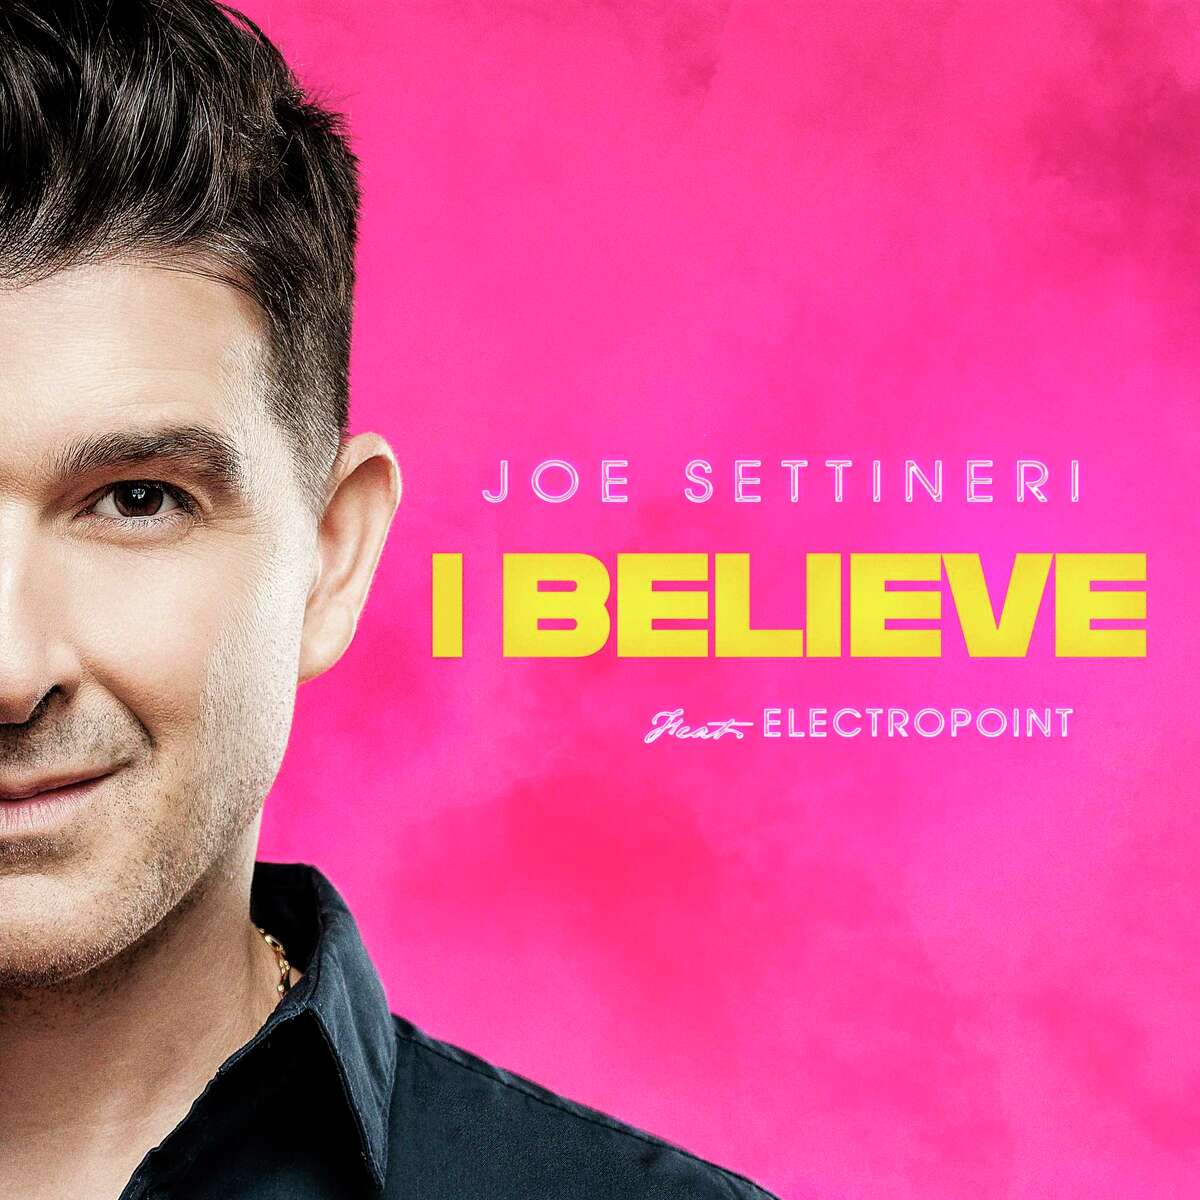 Joe Settineri and Electropoint released "I Believe" on June 12. (Photo provided)